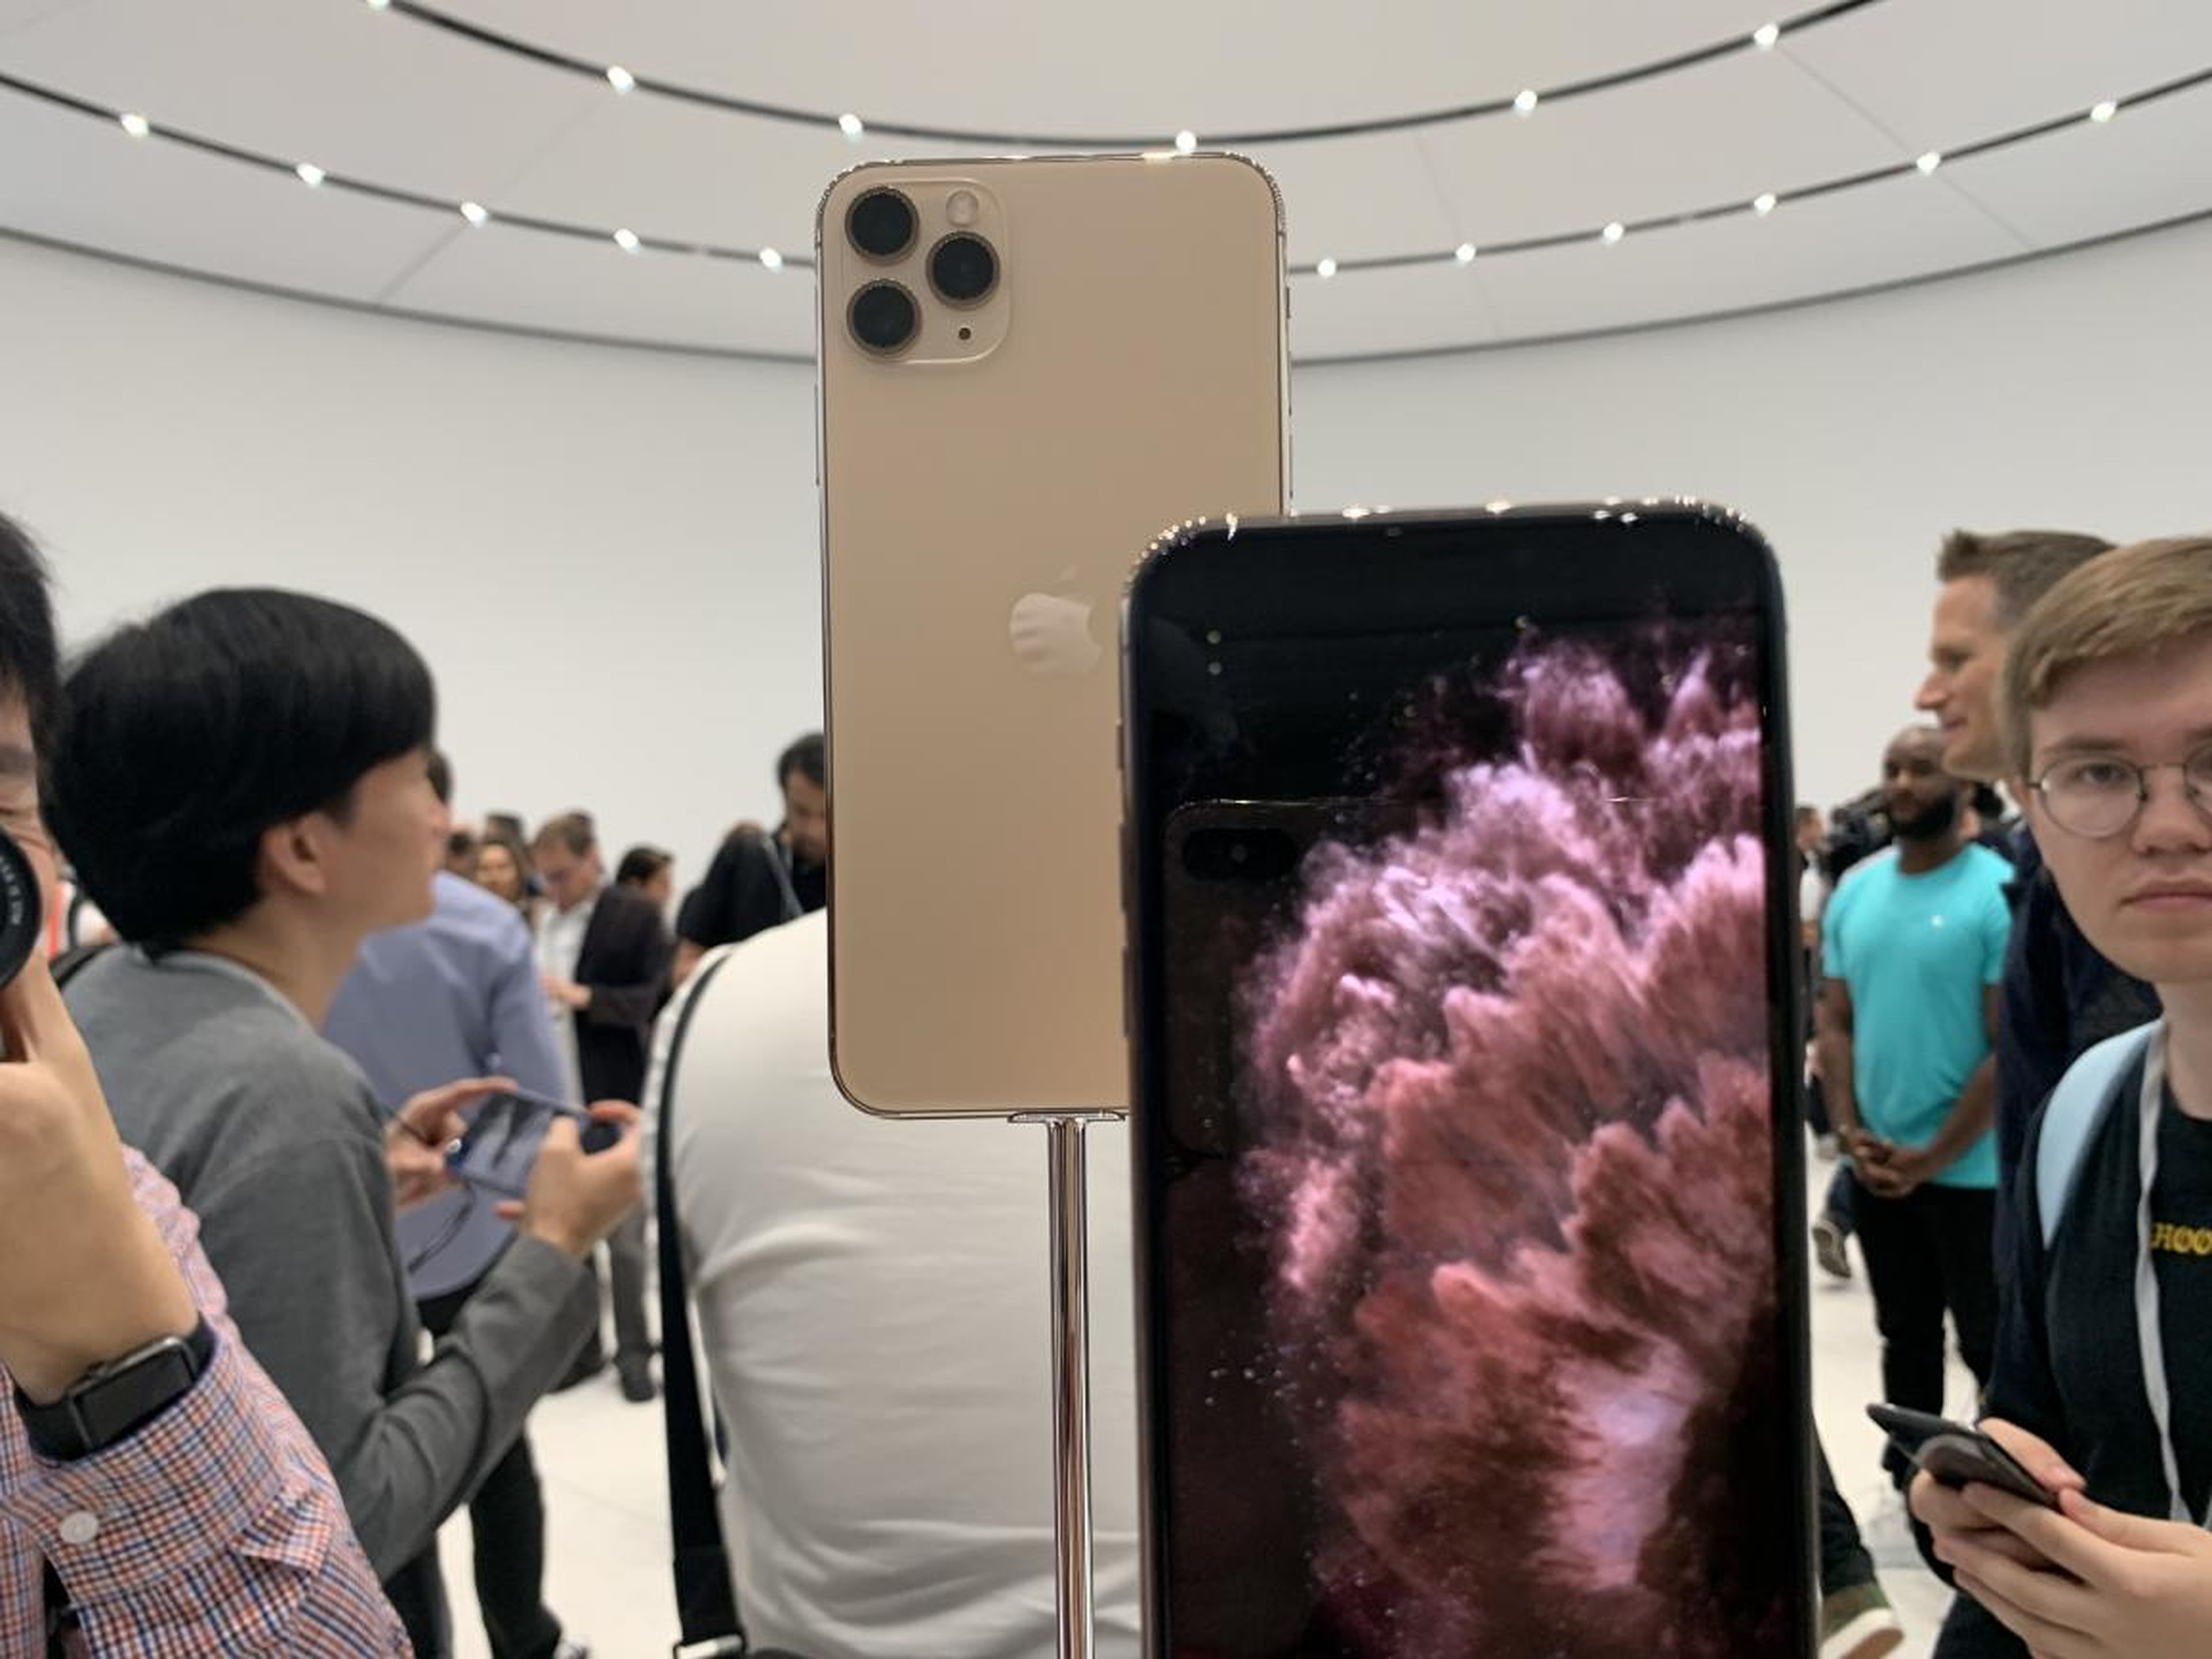 Like last year, the iPhone 11 Pro also comes in gold ...